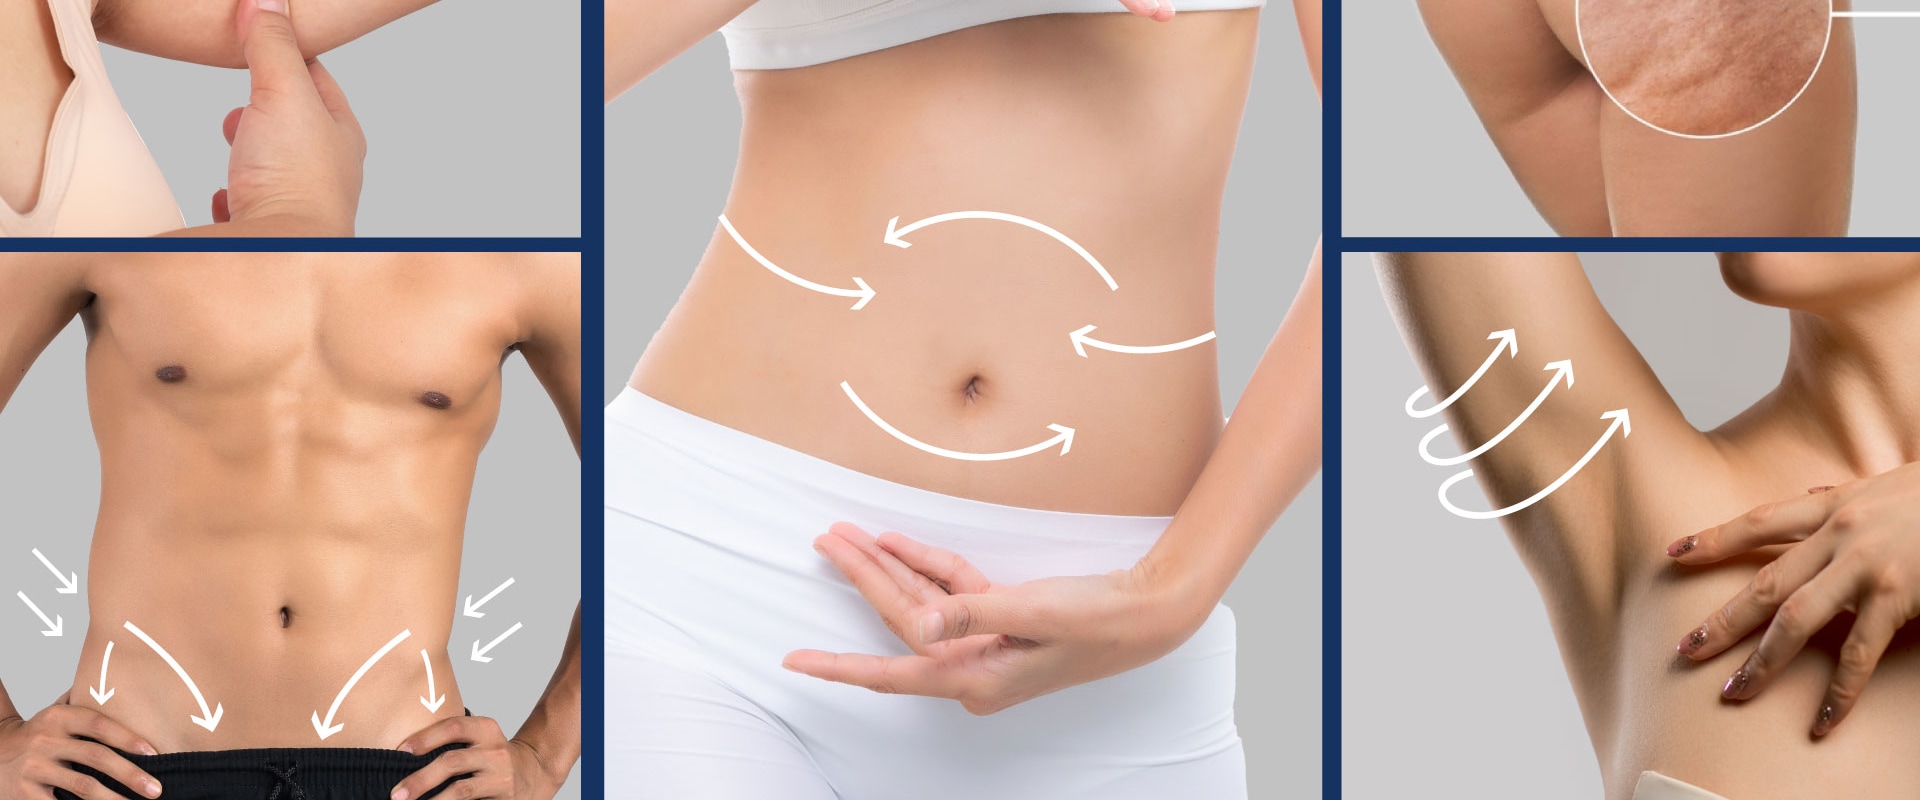 Non-Invasive Fat Reduction: What Areas of the Body Can Be Treated?